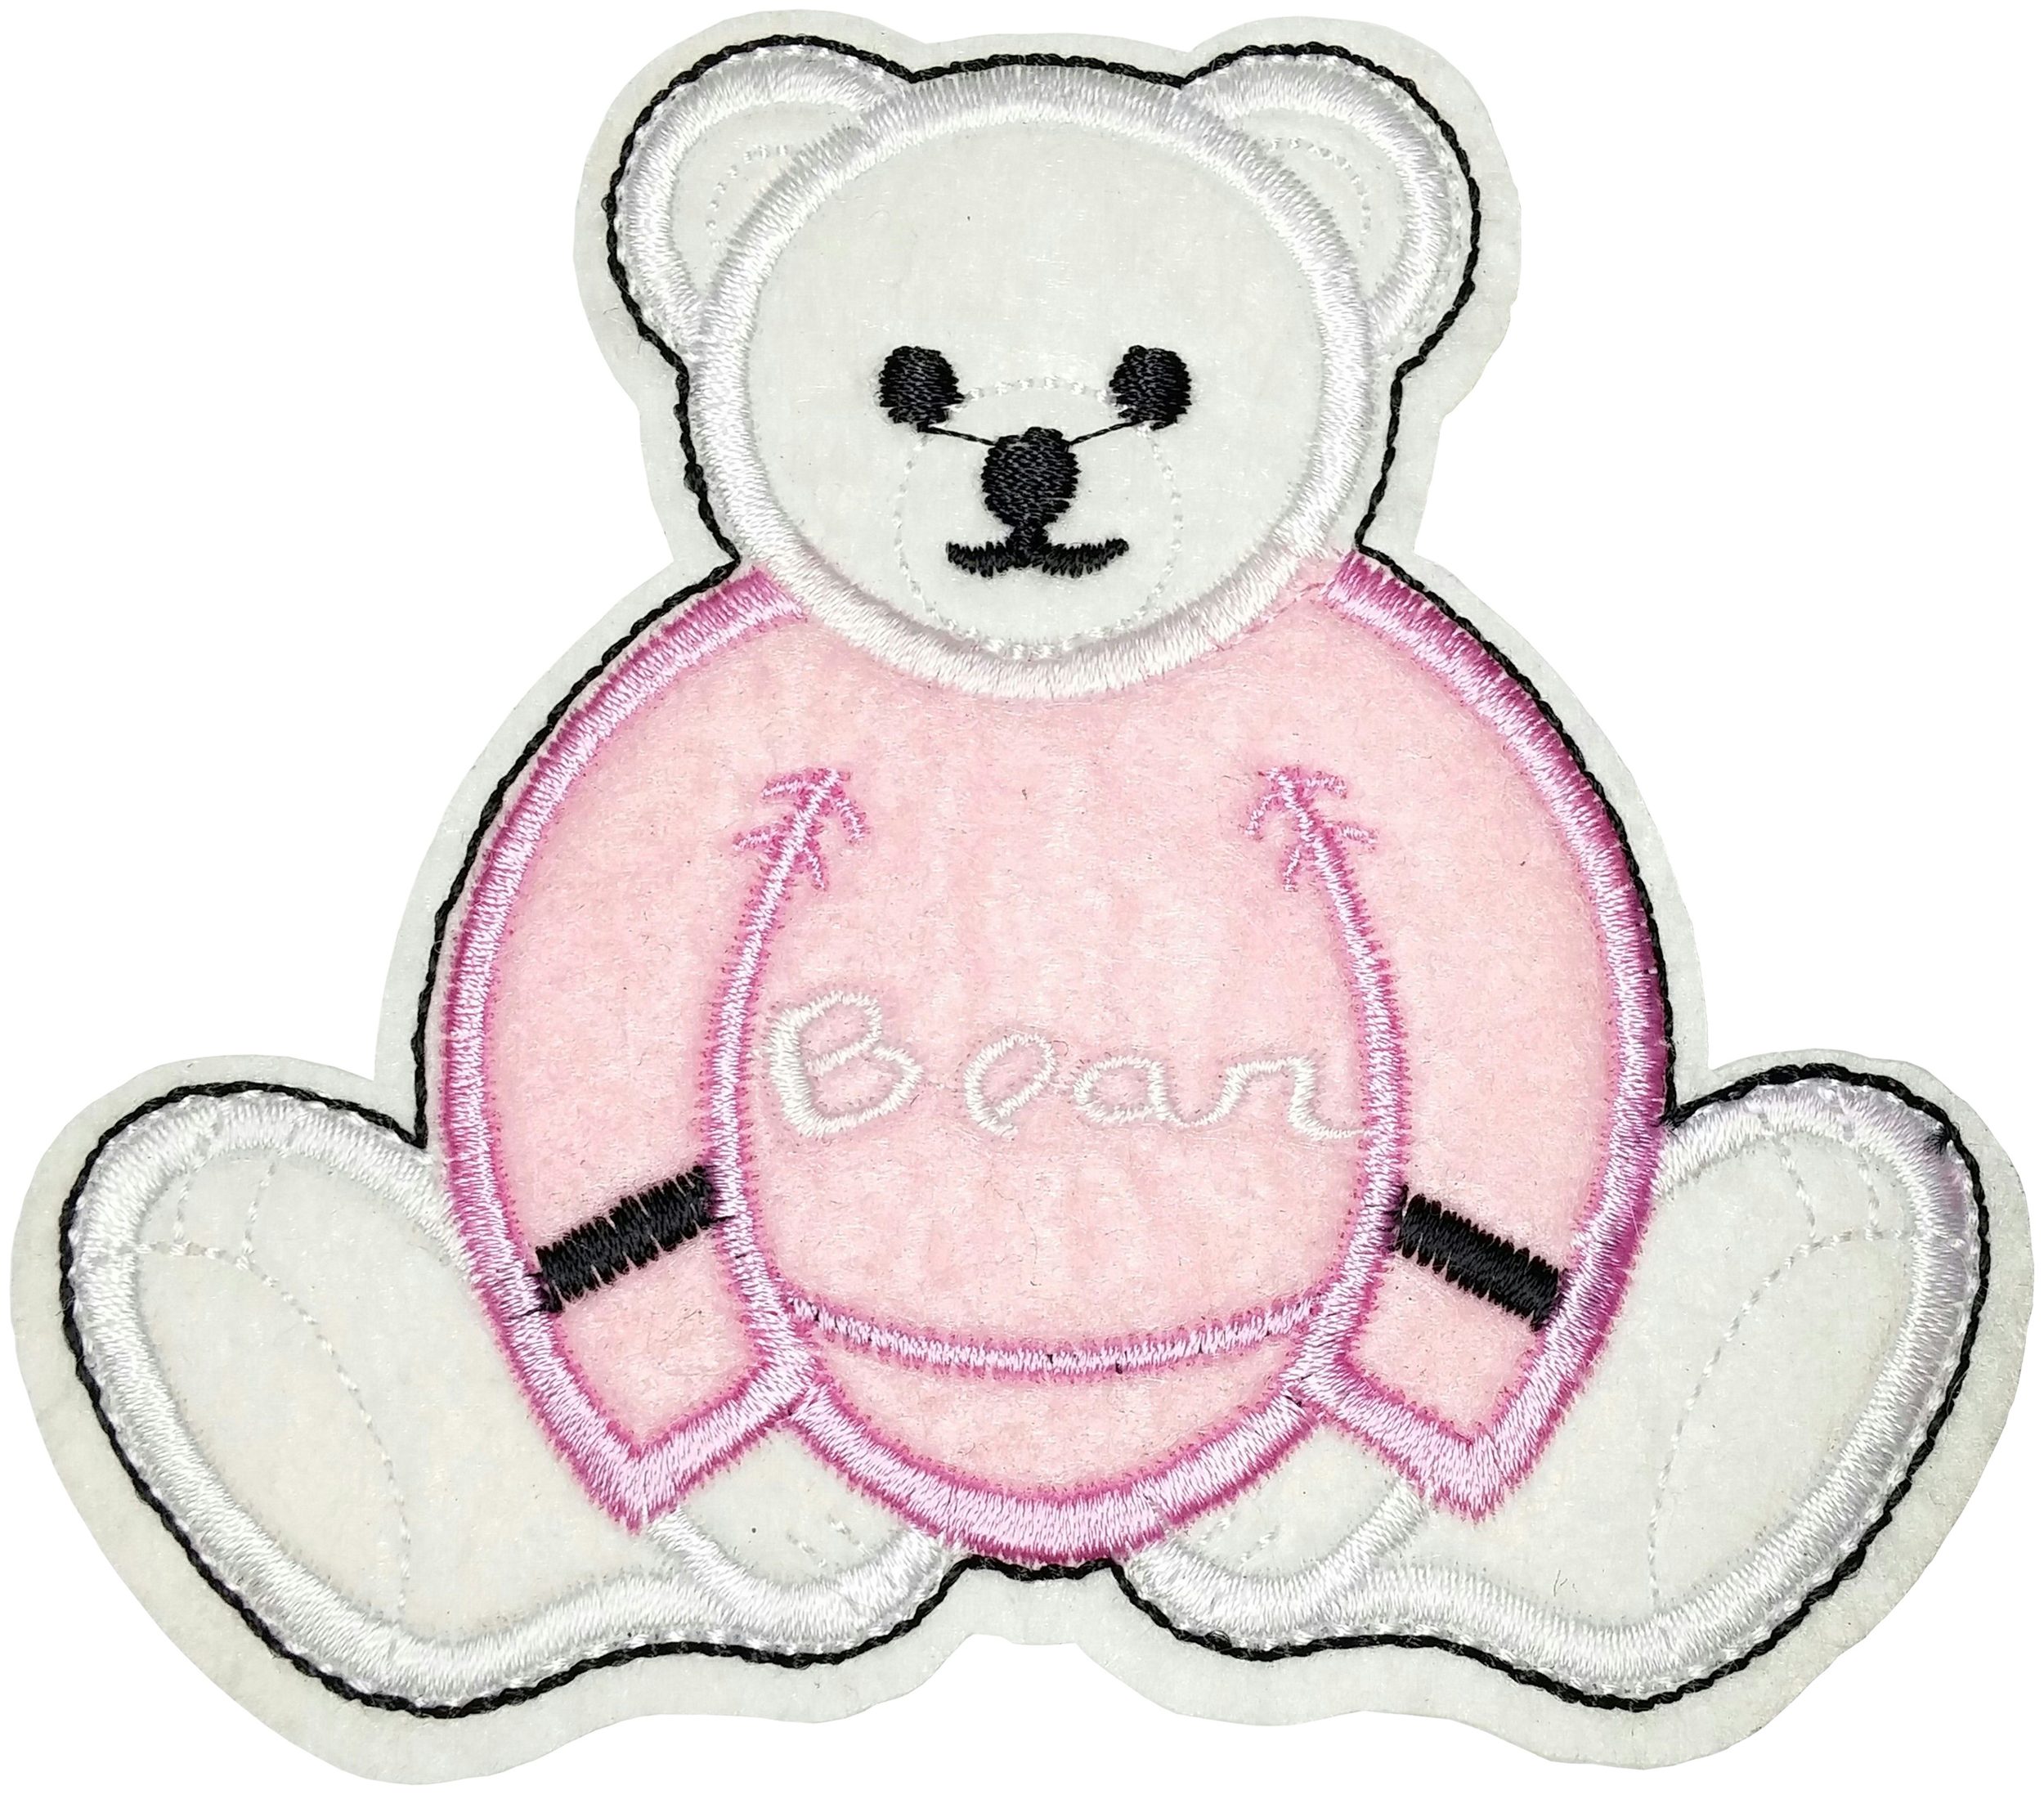 Grand Patch Thermocollant Ours Blanc Polaire Nounours Ourson